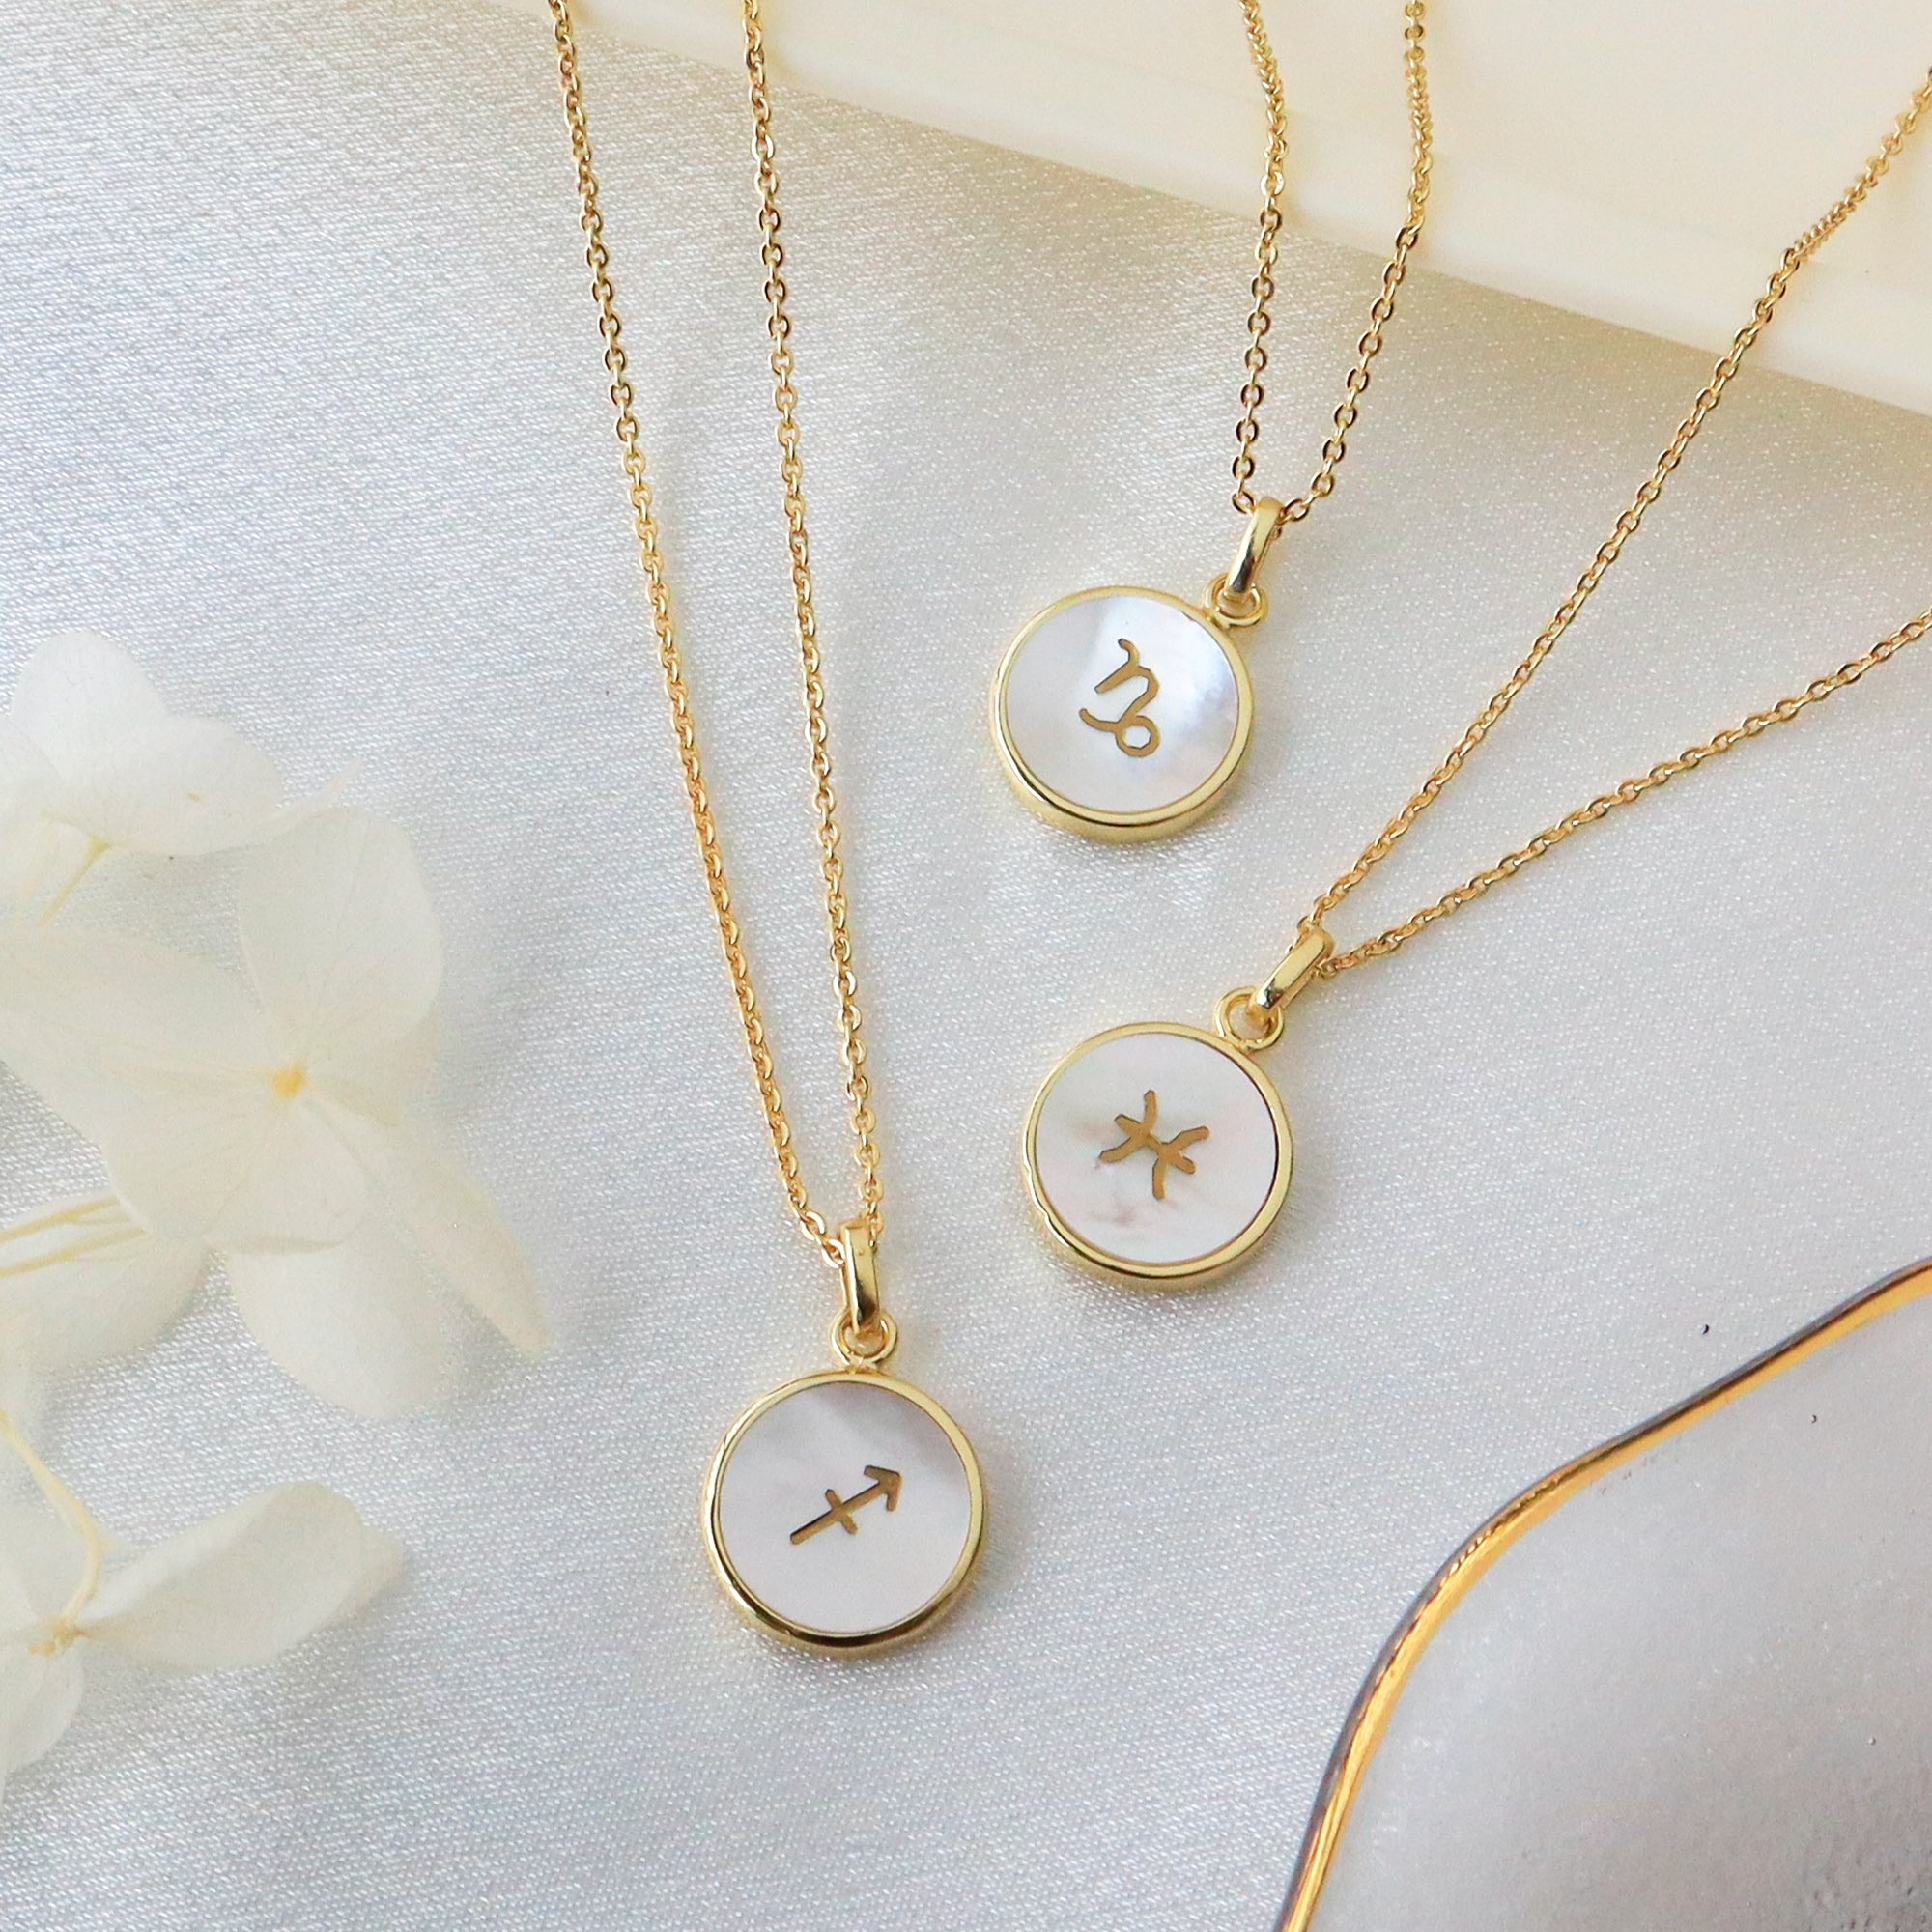 Wholesale Gold Plated Round White Shell Carved Constellation Pendant Necklace, Natural Shell Coin Jewelry KZ010